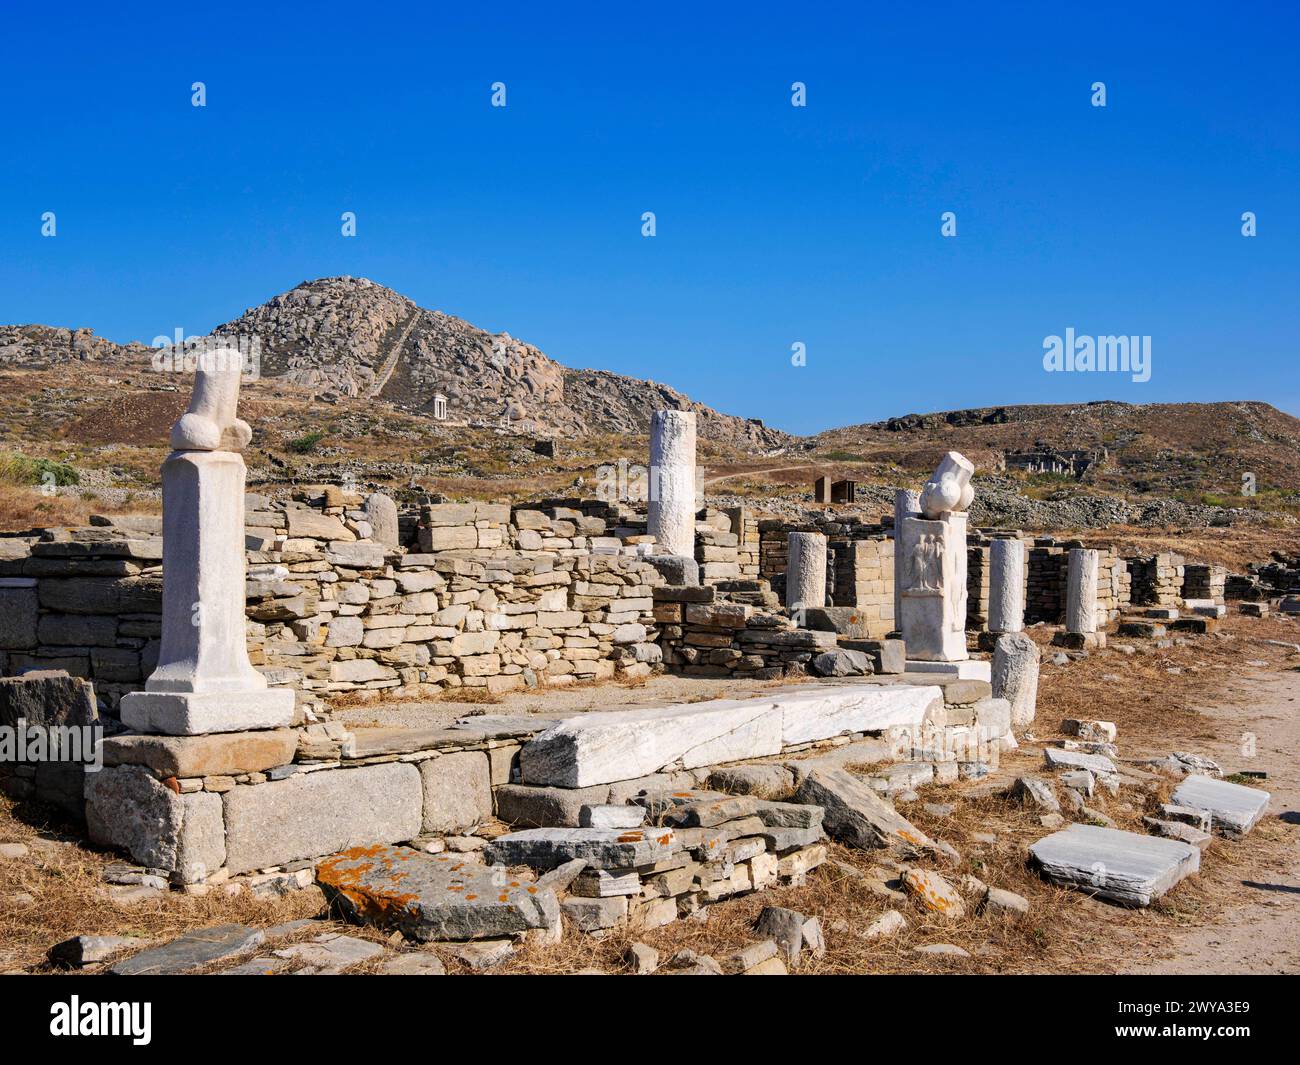 View towards the Mount Kynthos, Delos Archaeological Site, UNESCO World Heritage Site, Delos Island, Cyclades, Greek Islands, Greece, Europe Copyright Stock Photo